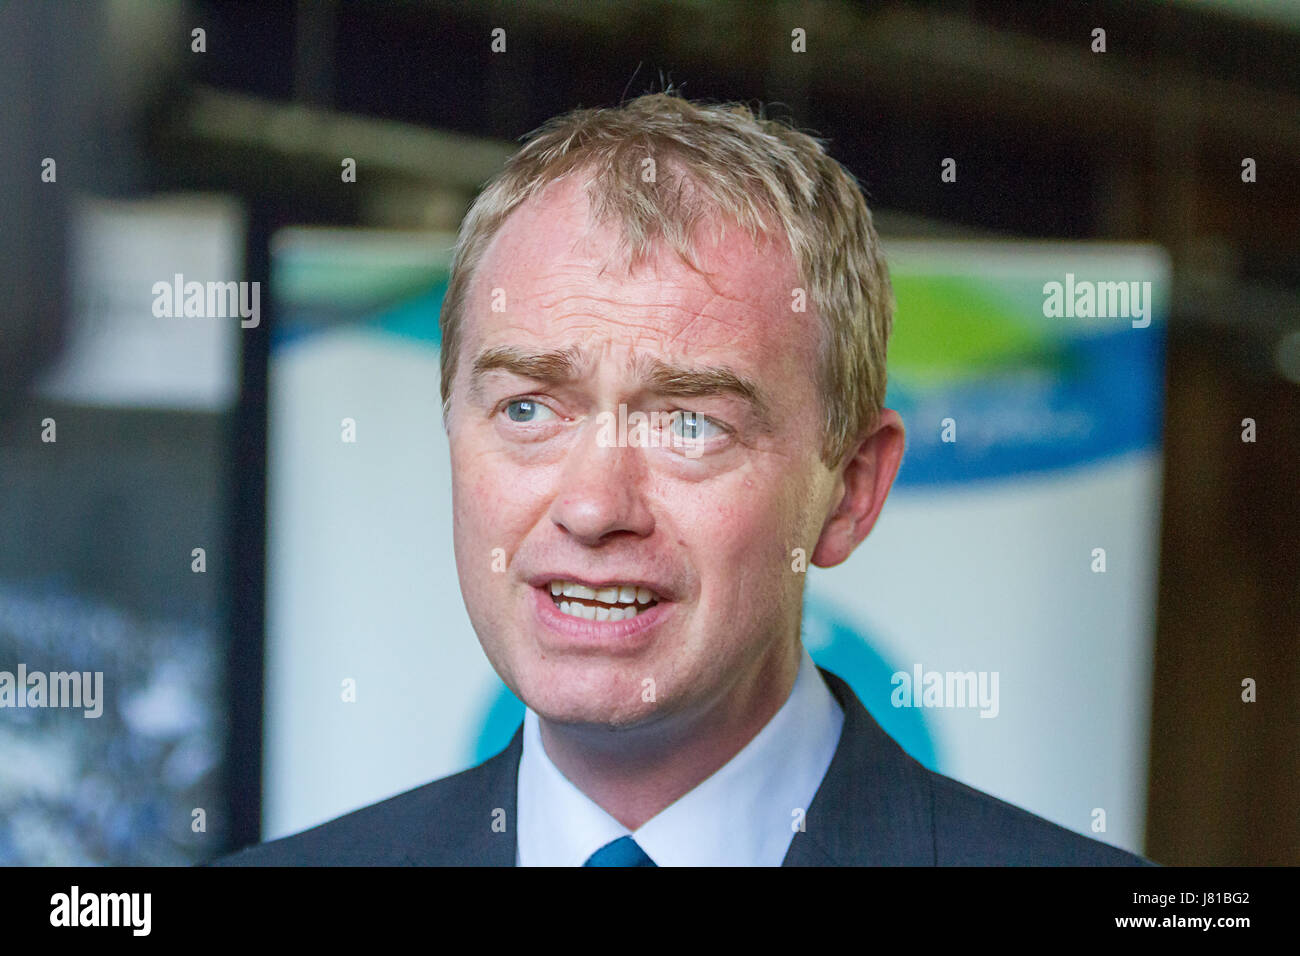 Warrington, UK. 26th May, 2017. Warrington Peace Centre, Warrington, UK. 26th May, 2017. Leader of the Liberal Democrats, Tim Farron, visited Warrington Peace Centre on 26 May 2017 and after a tour of the building and meeting Colin and Wendy Parry who lost their 12 year old son, Tim Parry, in the bombing of Warrington in 1993. Leader of the Liberal Democrats, Tim Farron, talks to the media at the Peace Centre in Warrington on 26 May 2017 Credit: John Hopkins/Alamy Live News Credit: John Hopkins/Alamy Live News Stock Photo